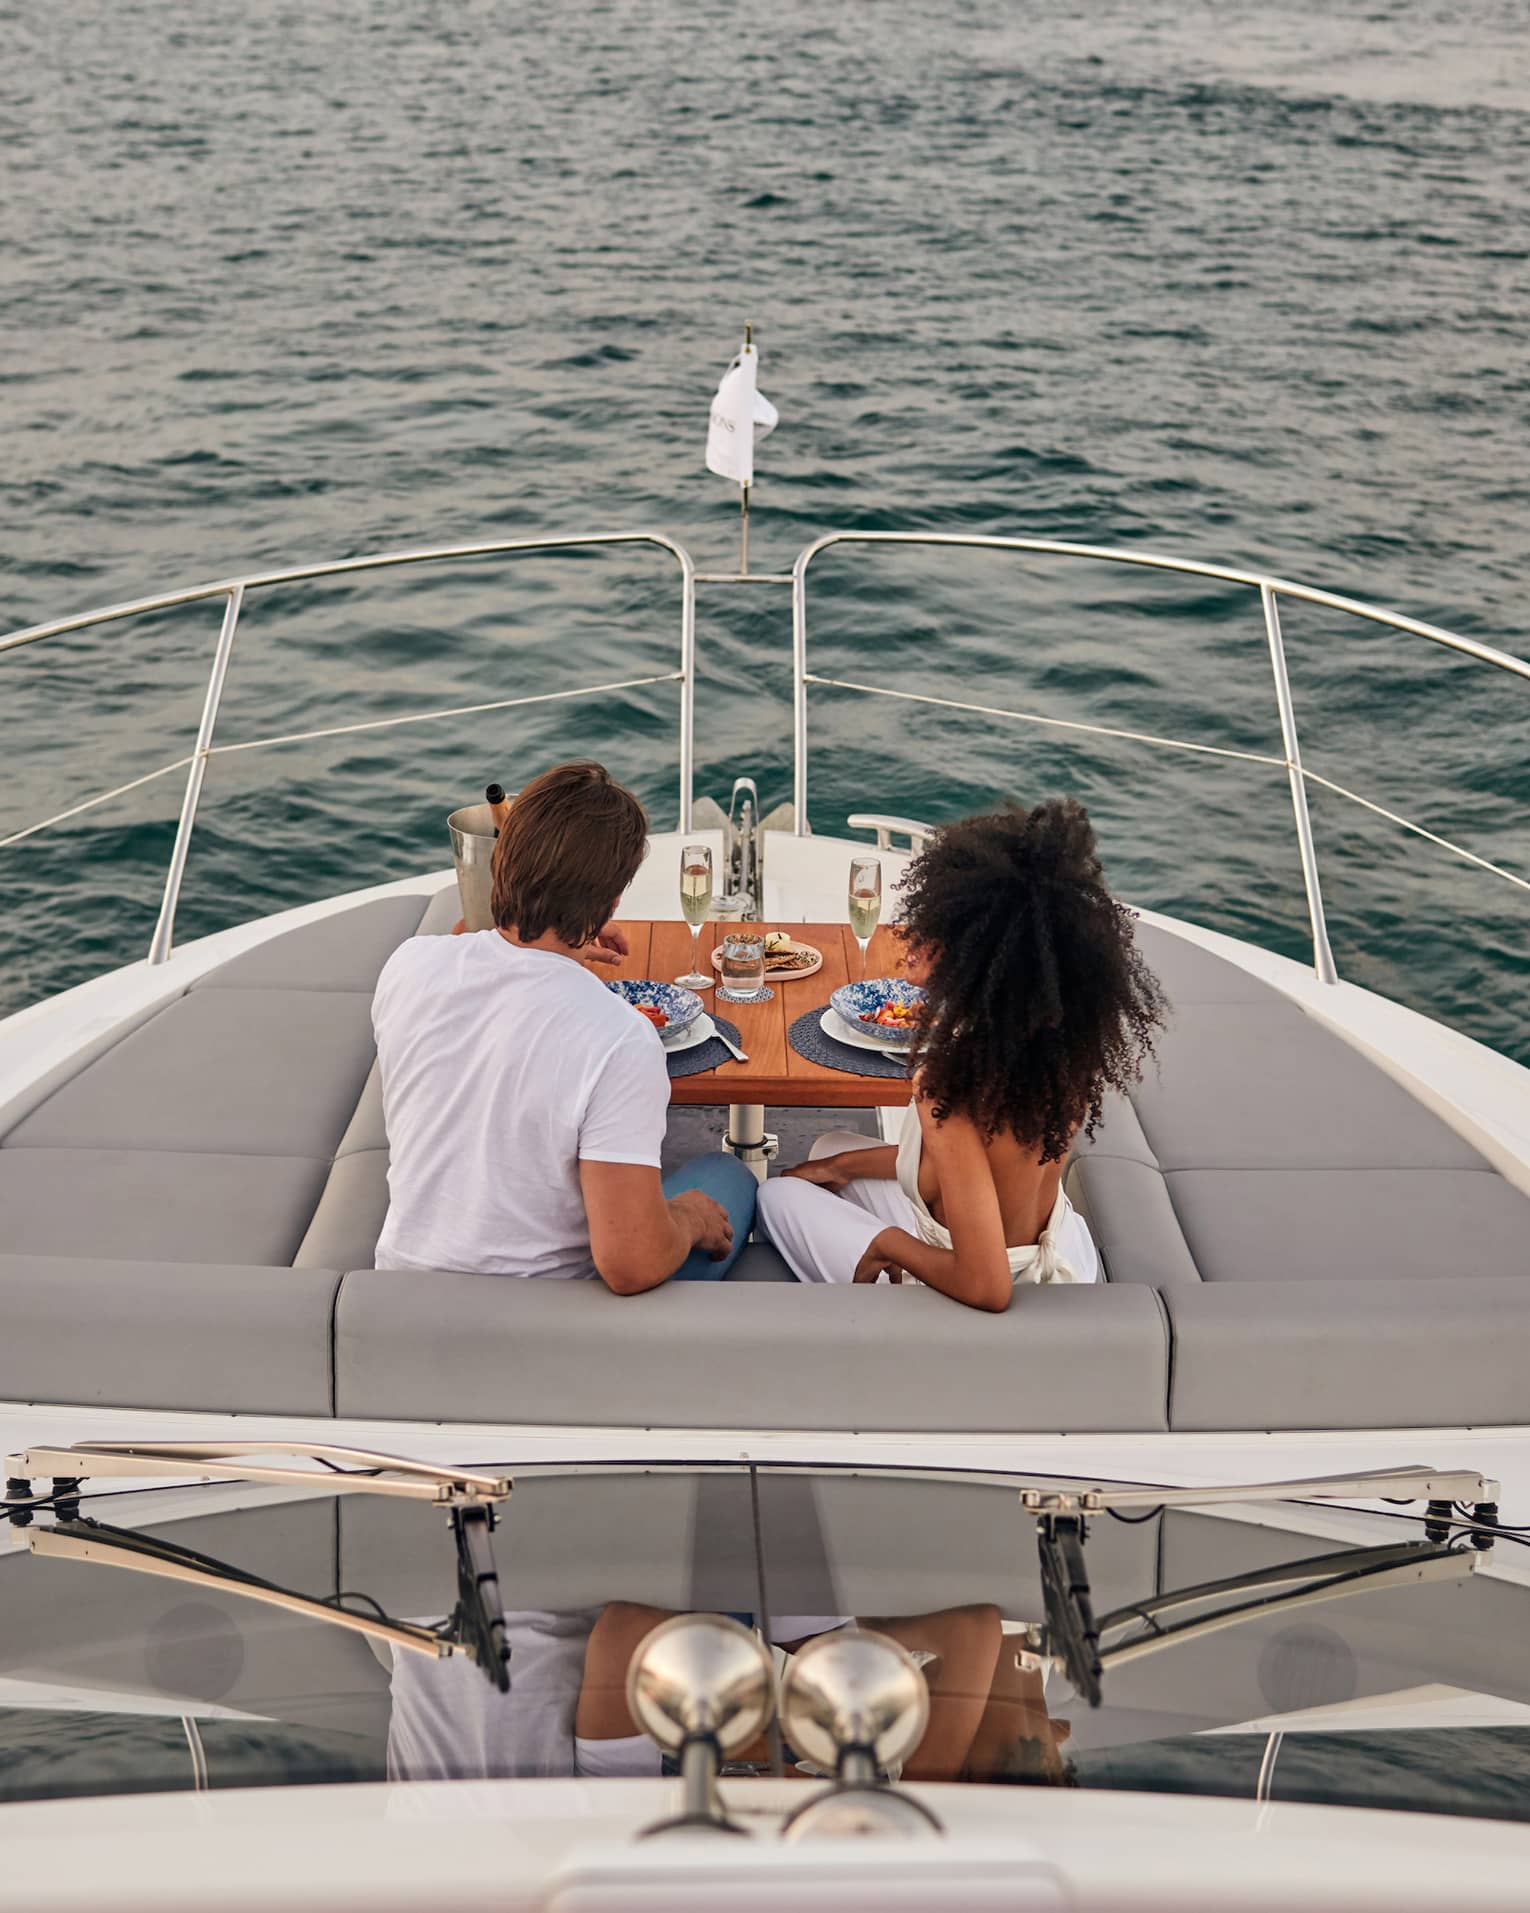 A man and woman eating food on the deck of a boat.